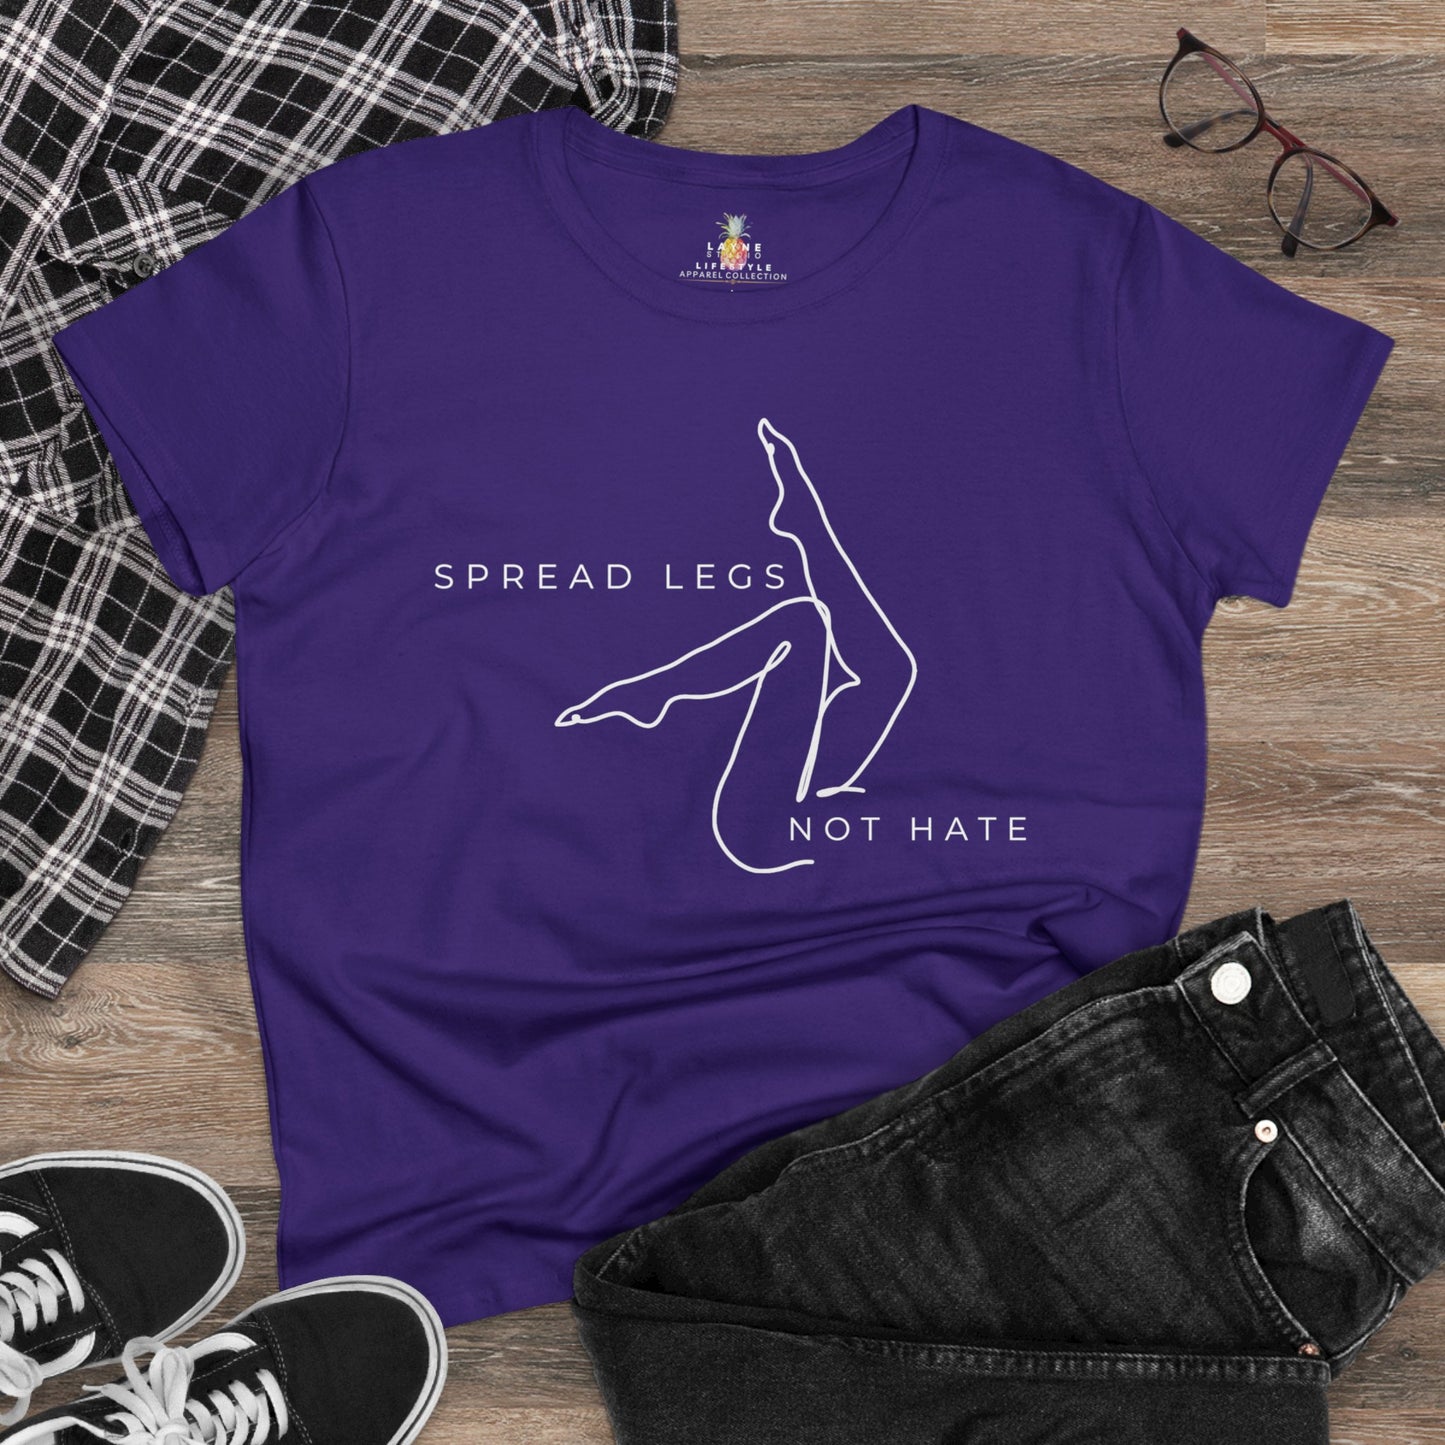 "Spread Legs, Not Hate" Graphic Women's Midweight Cotton Tee